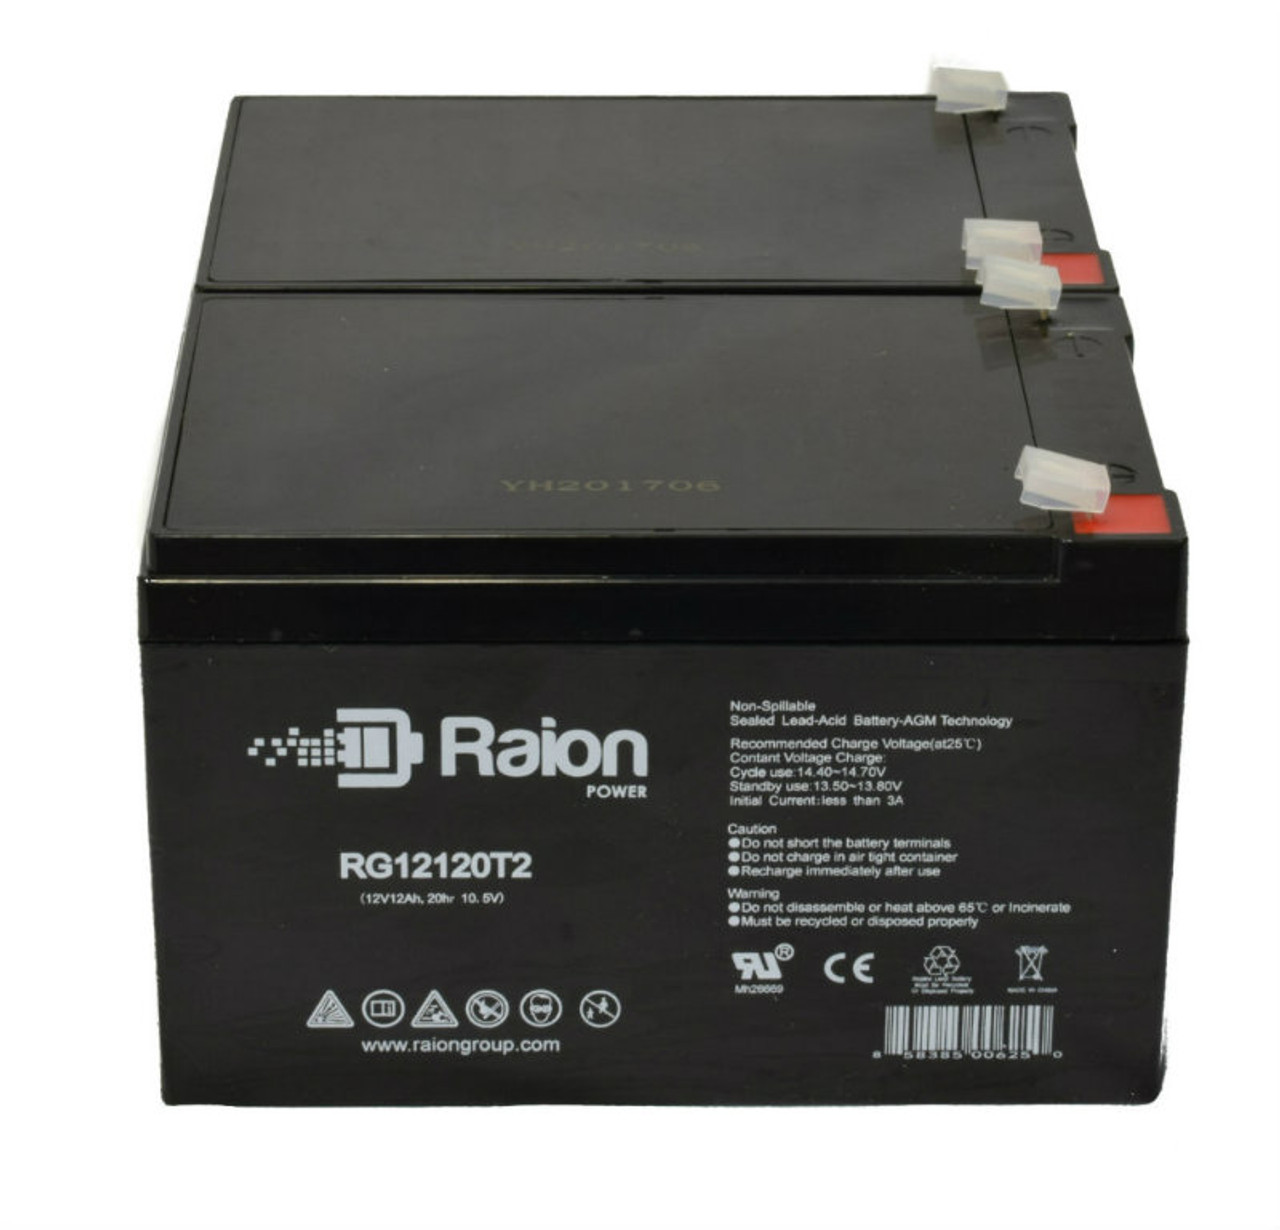 Raion Power 12V 12Ah Non-Spillable Compatible Replacement Battery for NEATA NT12-12 - (2 Pack)